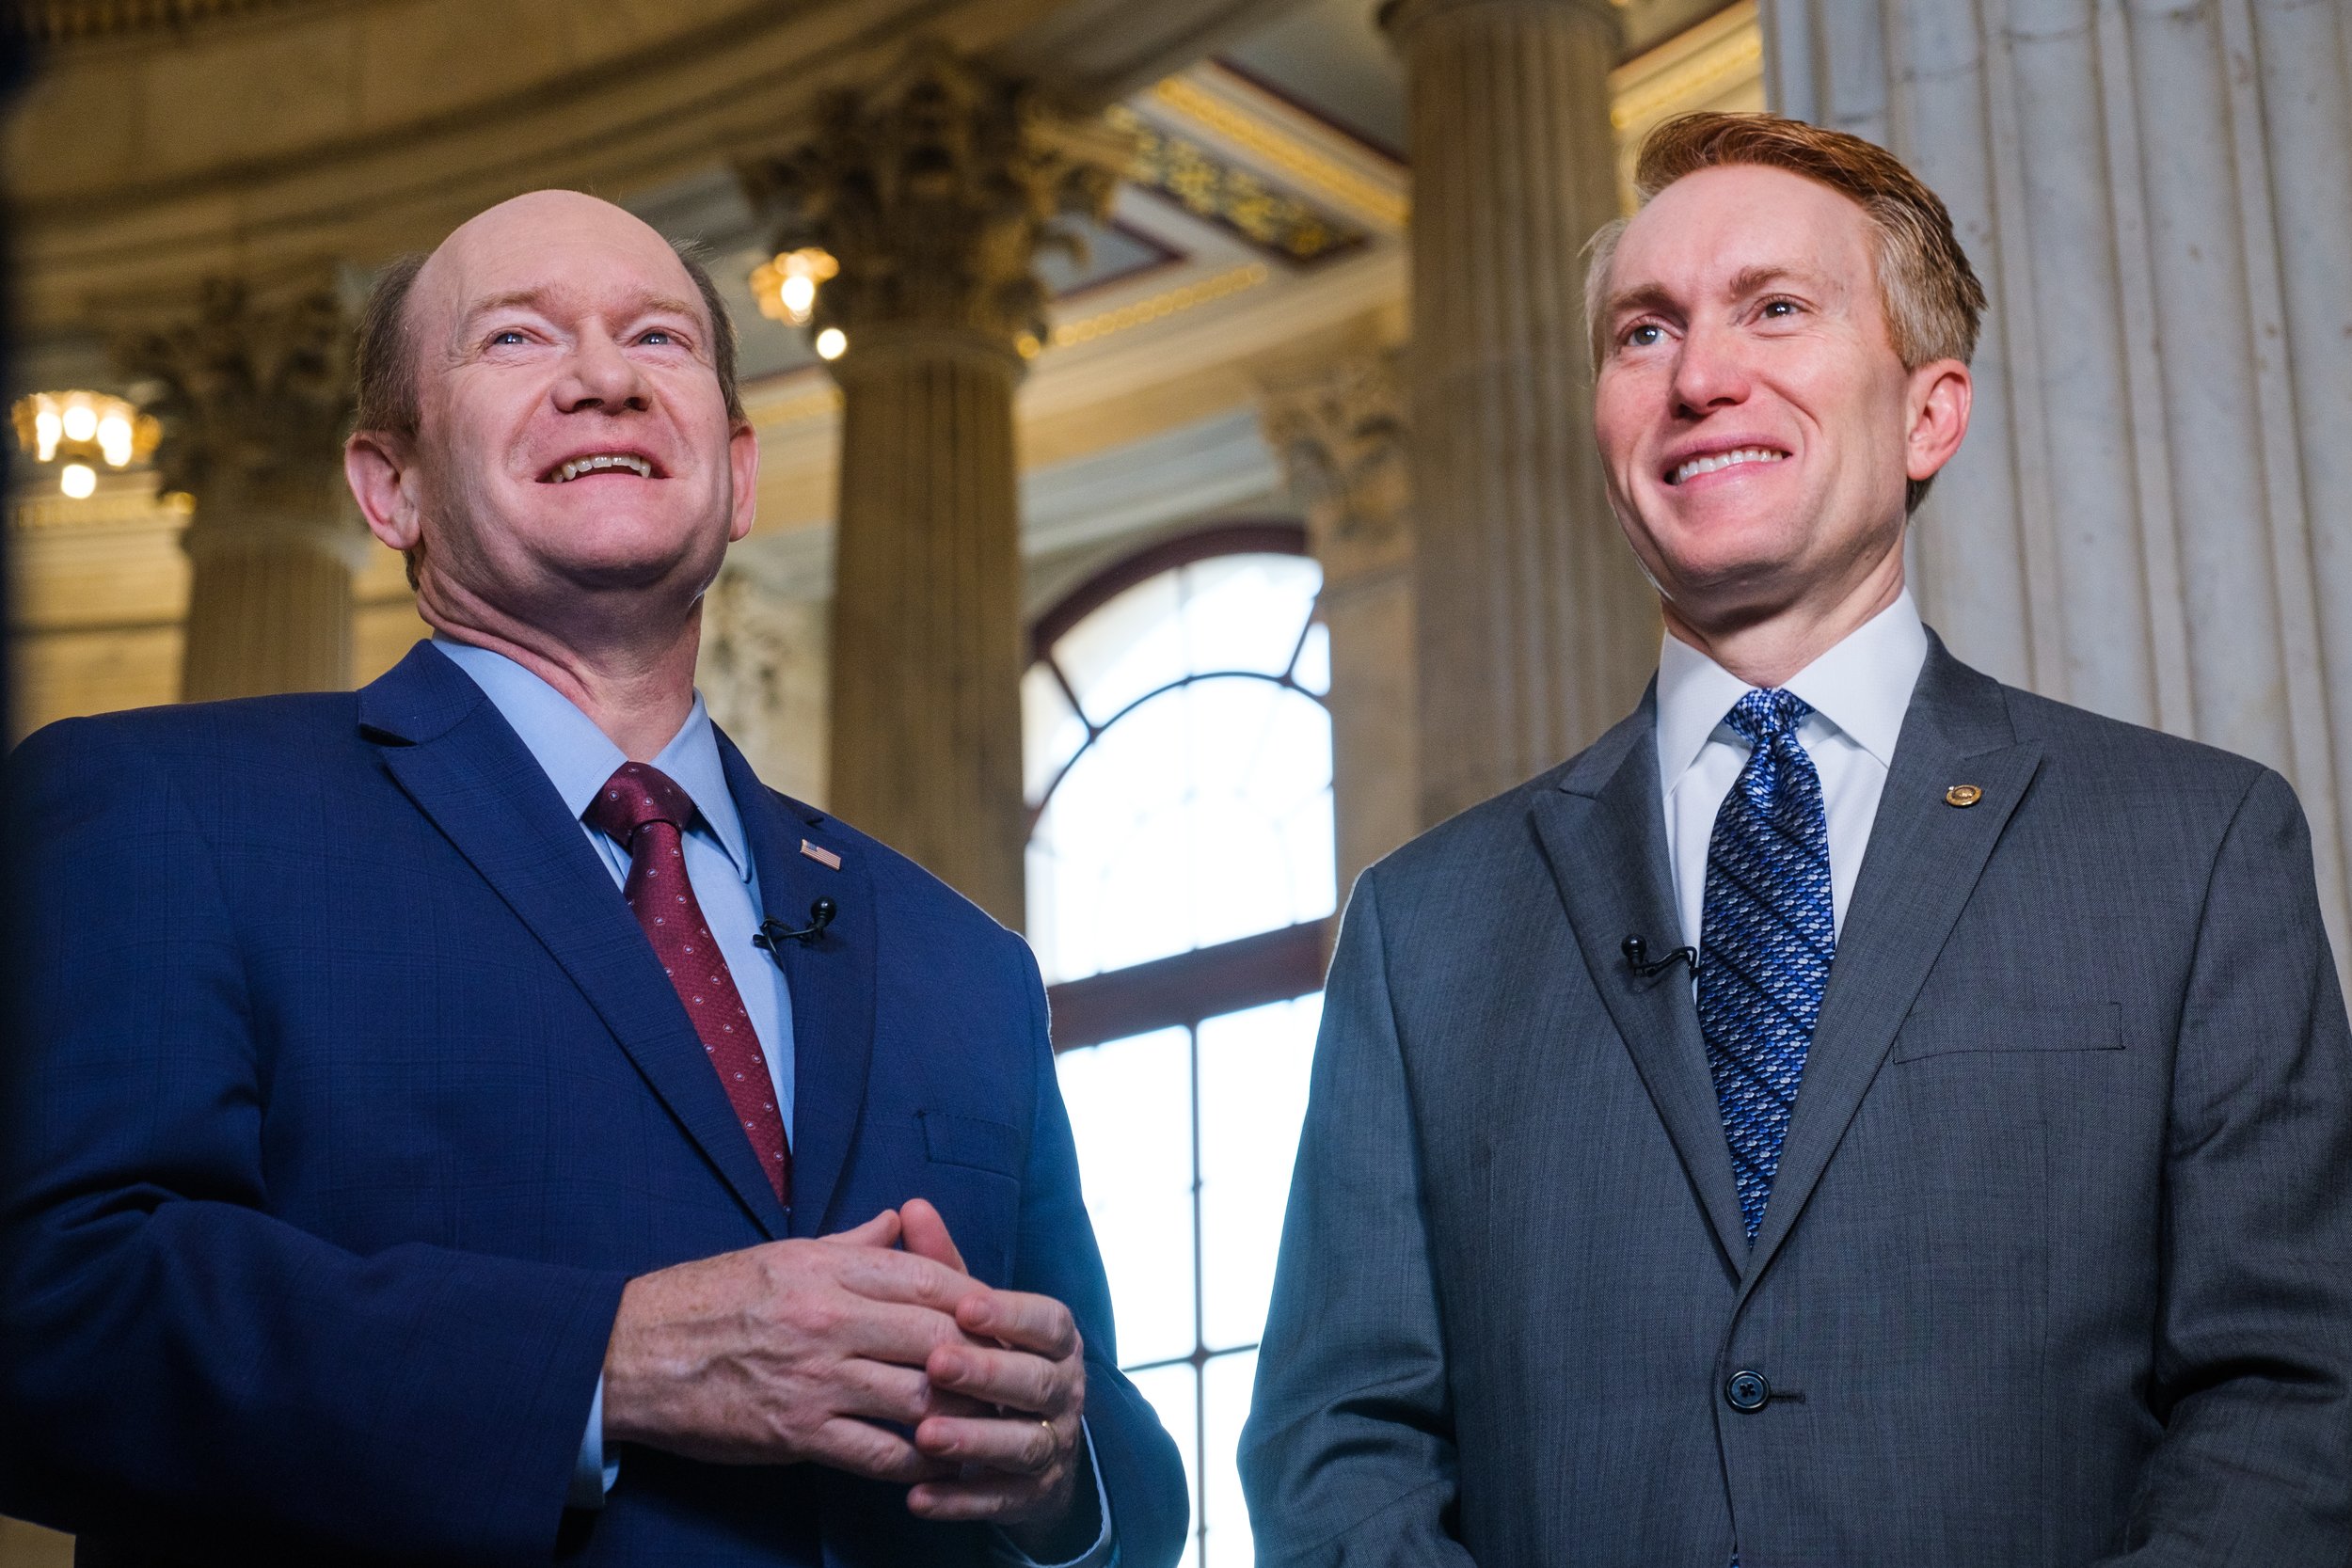  Sen. Chris Coons (D-DE) and Sen. James Lankford (R-OK) are interviewed in the Russell Rotunda ahead of the the National Prayer Breakfast.    January 2019   